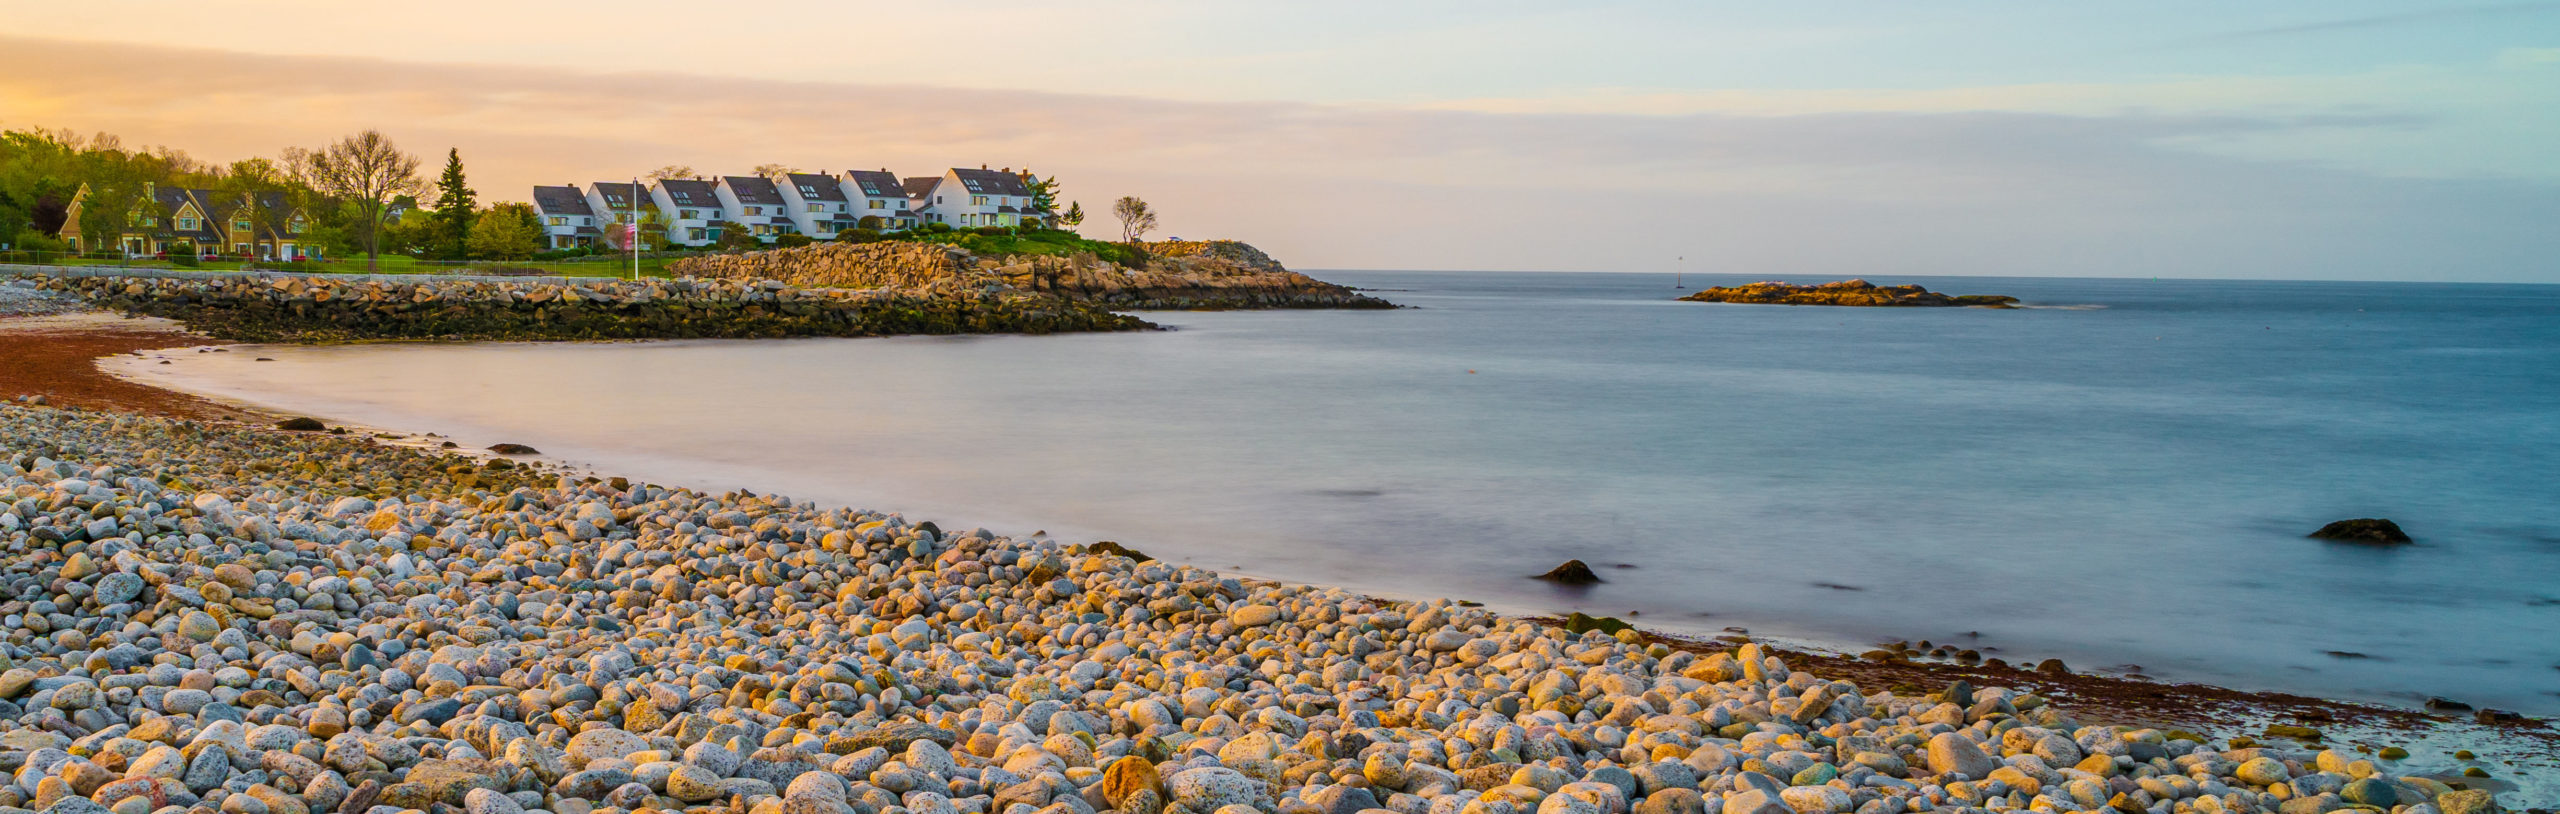 Things to do in Rockport Mass